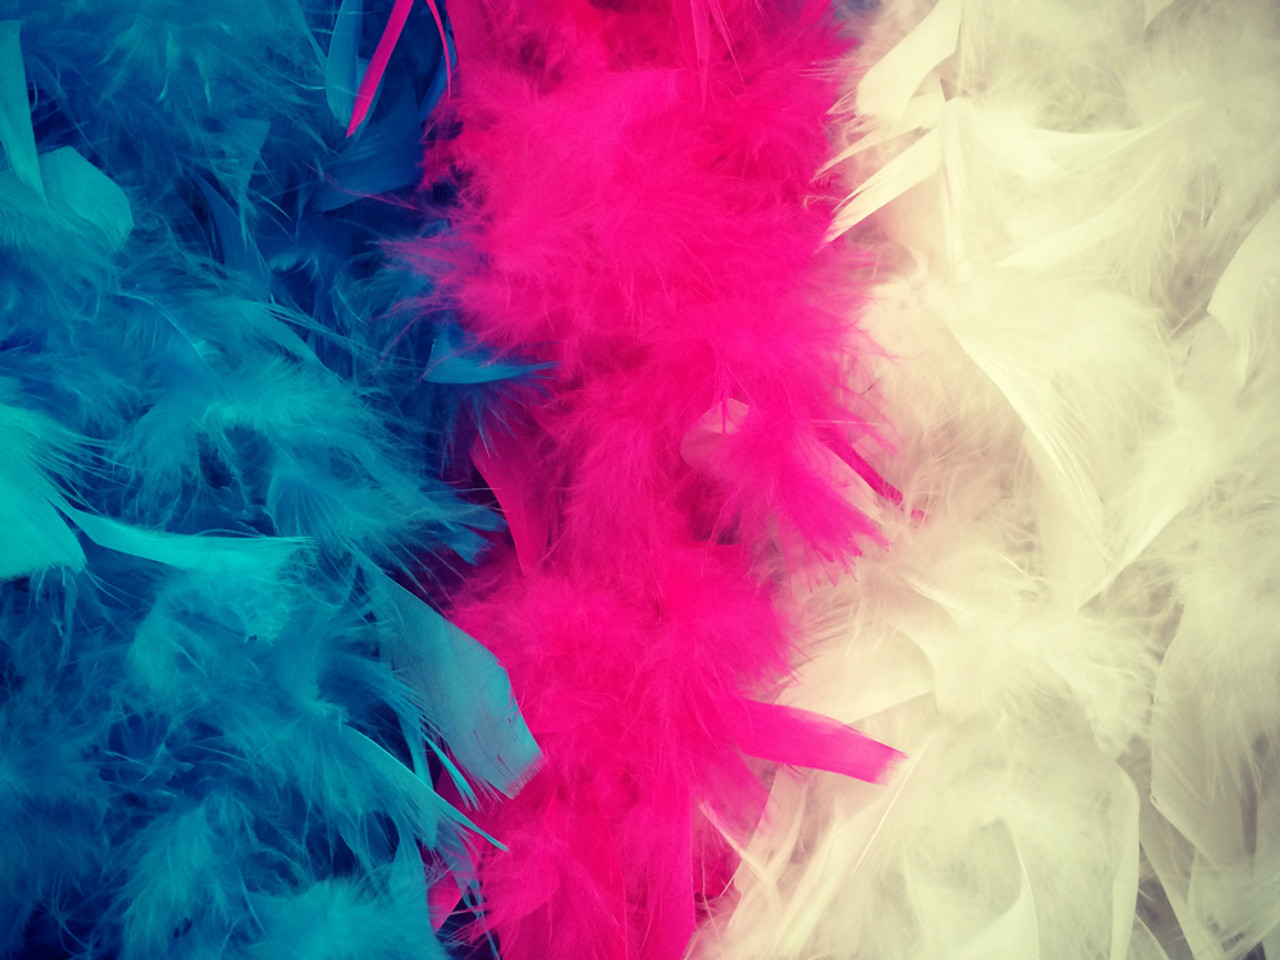 Zucker Light Weight Chandelle Feather Boas Solid Colors - Dusty Blue